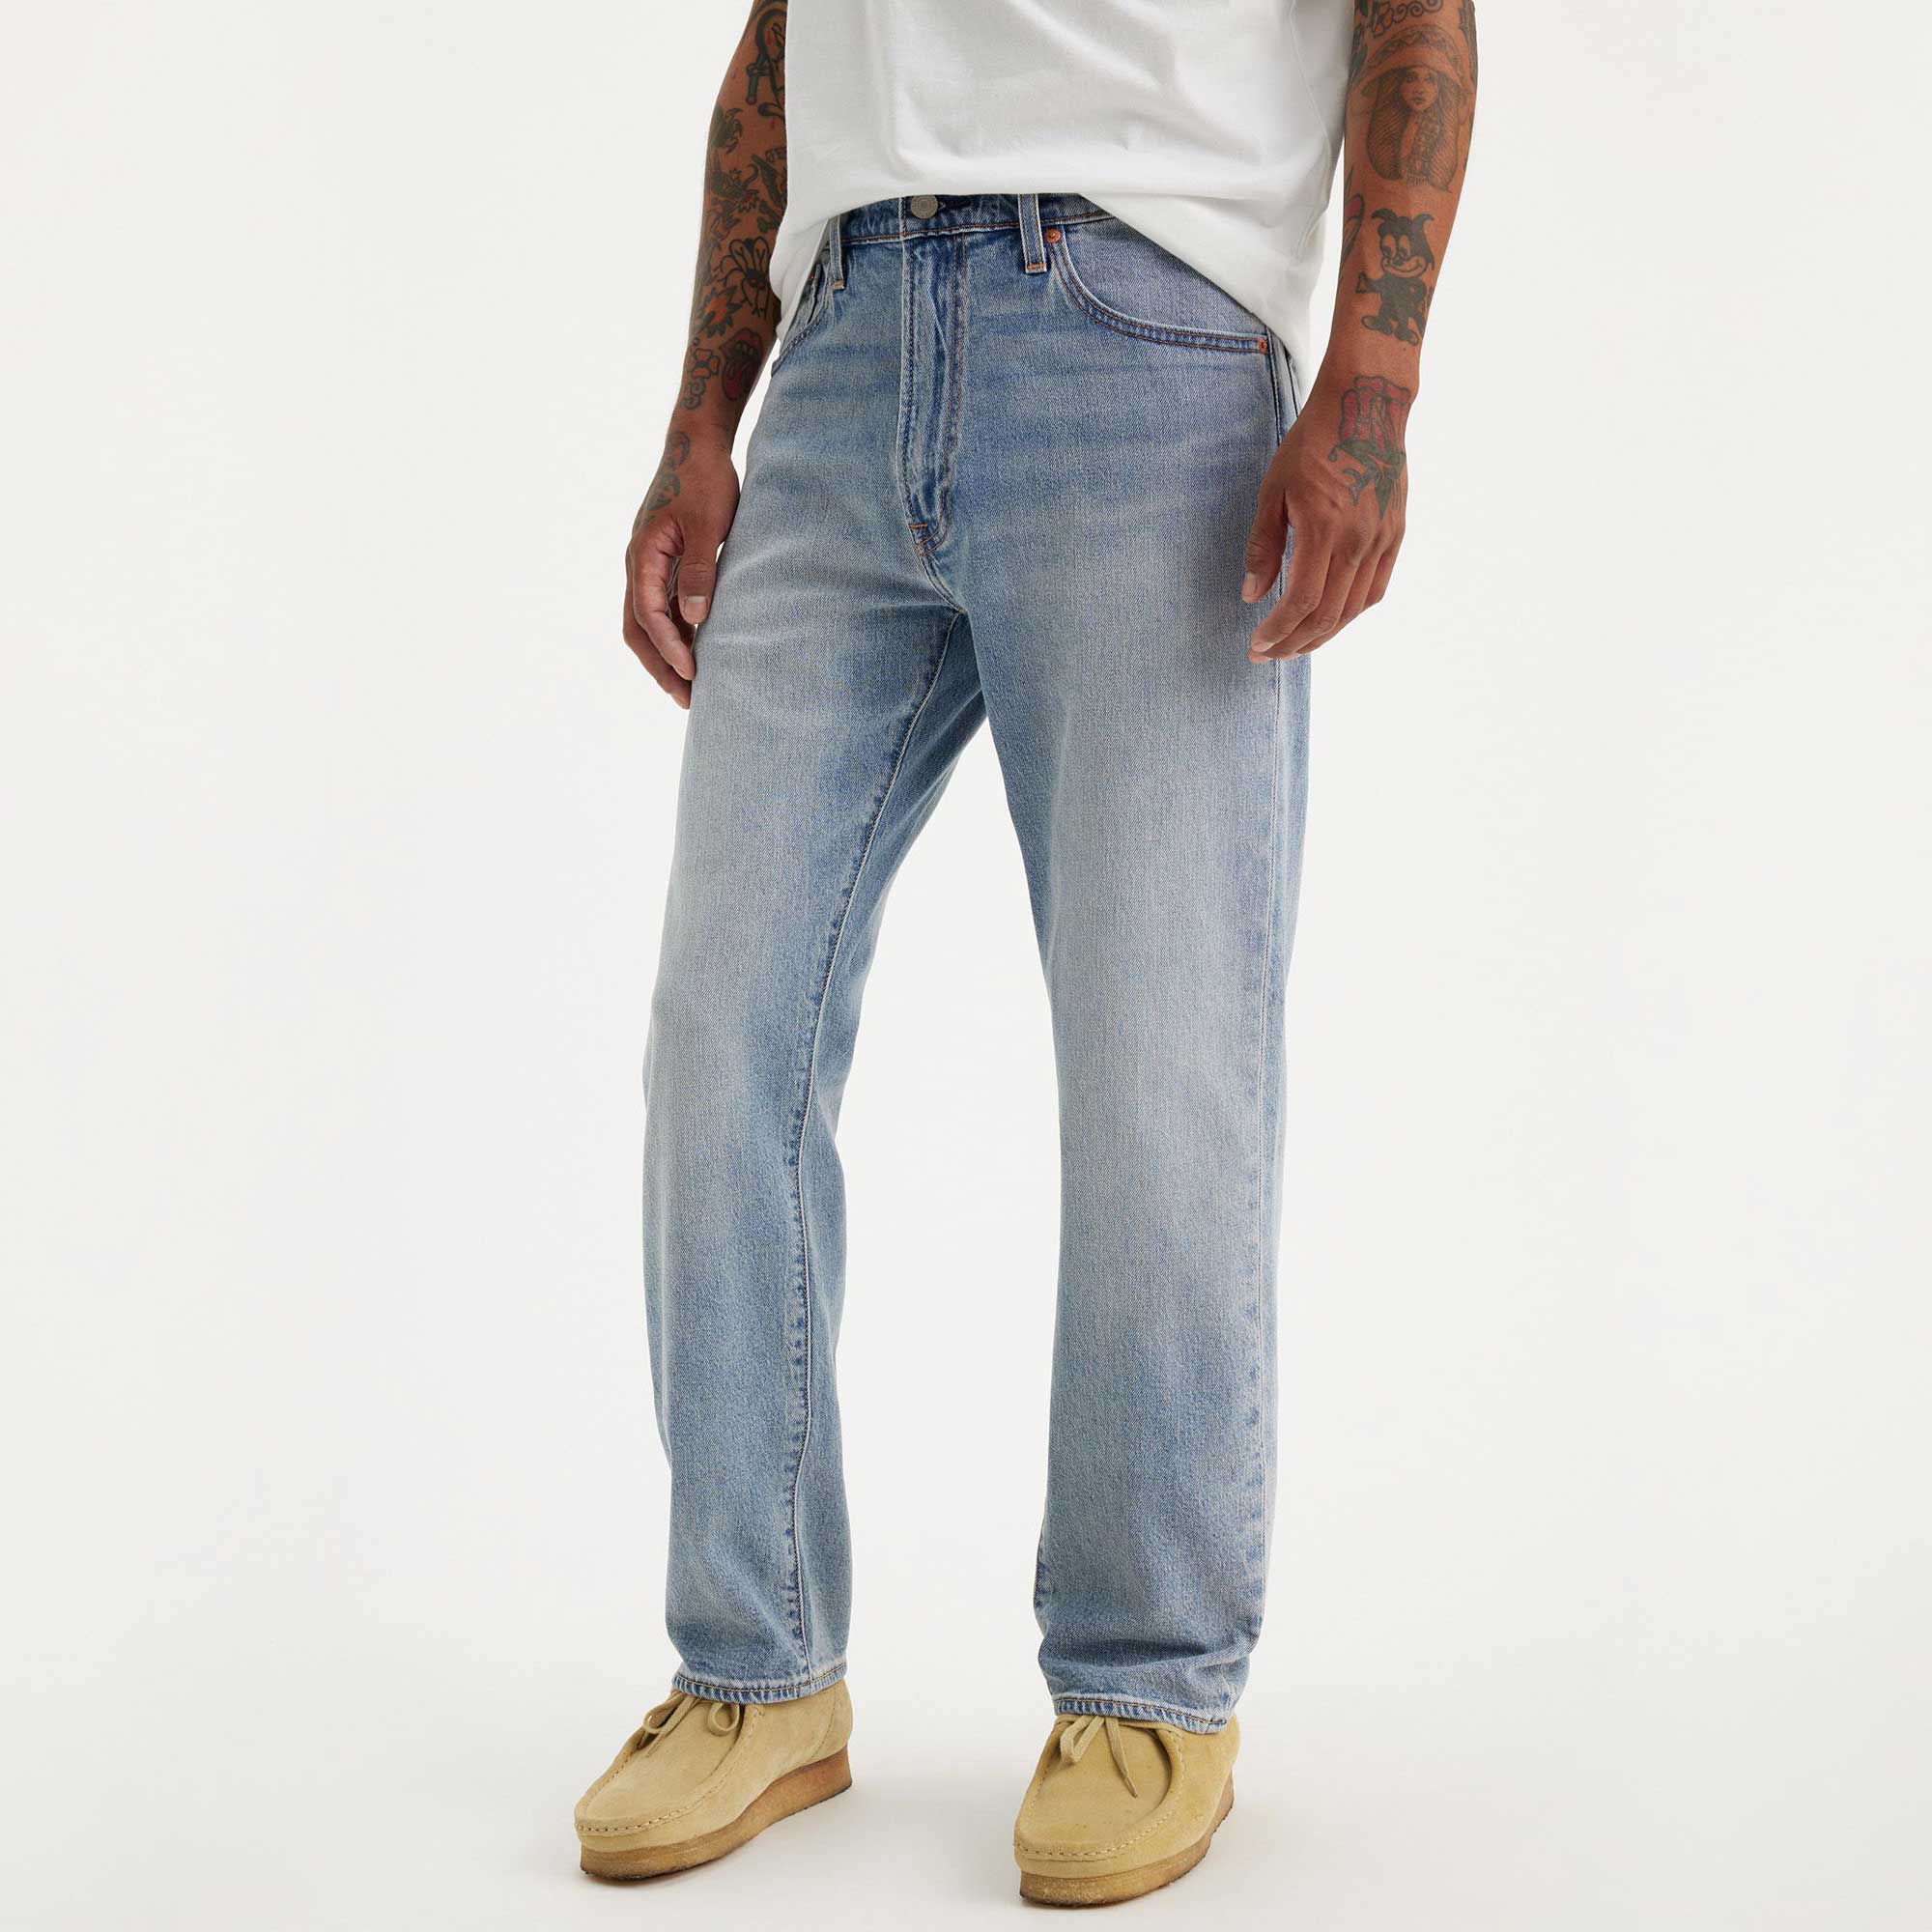 Levi's 551Z Authentic Straight, ace fade